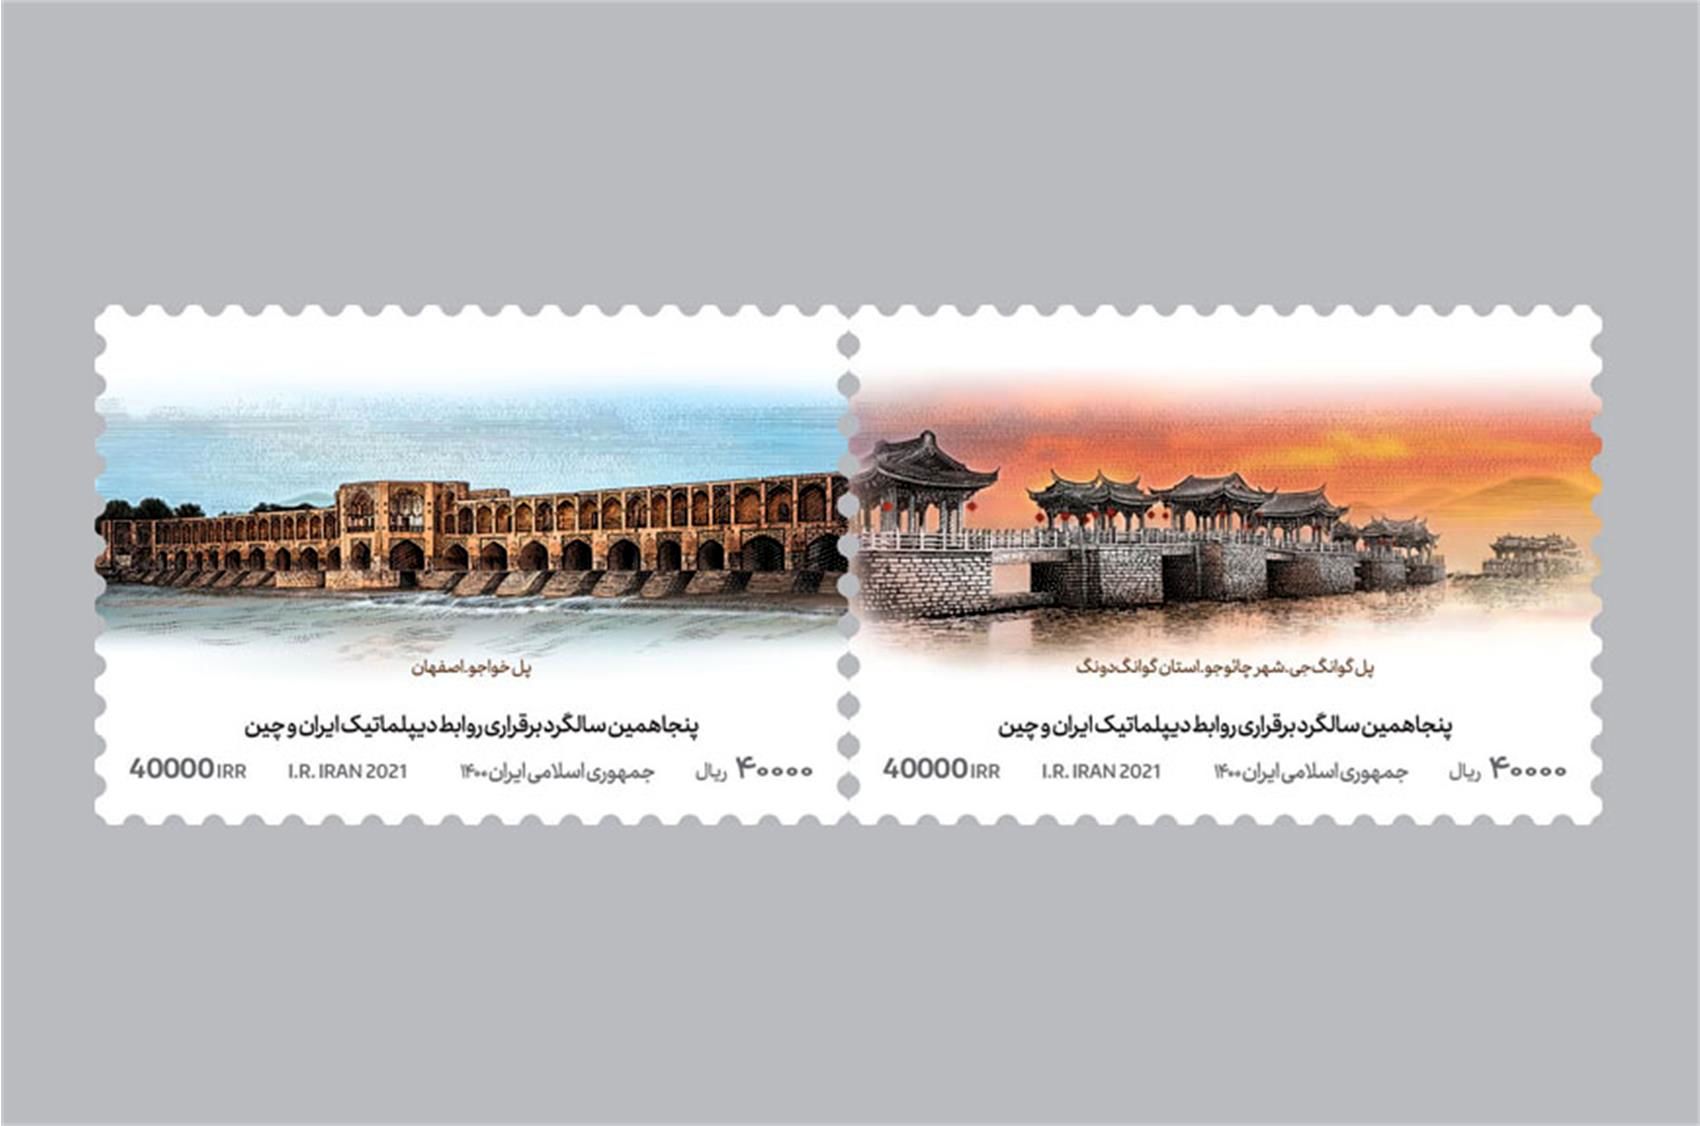 Post and Communications Museum will be holding exhibition of iran and china stamps